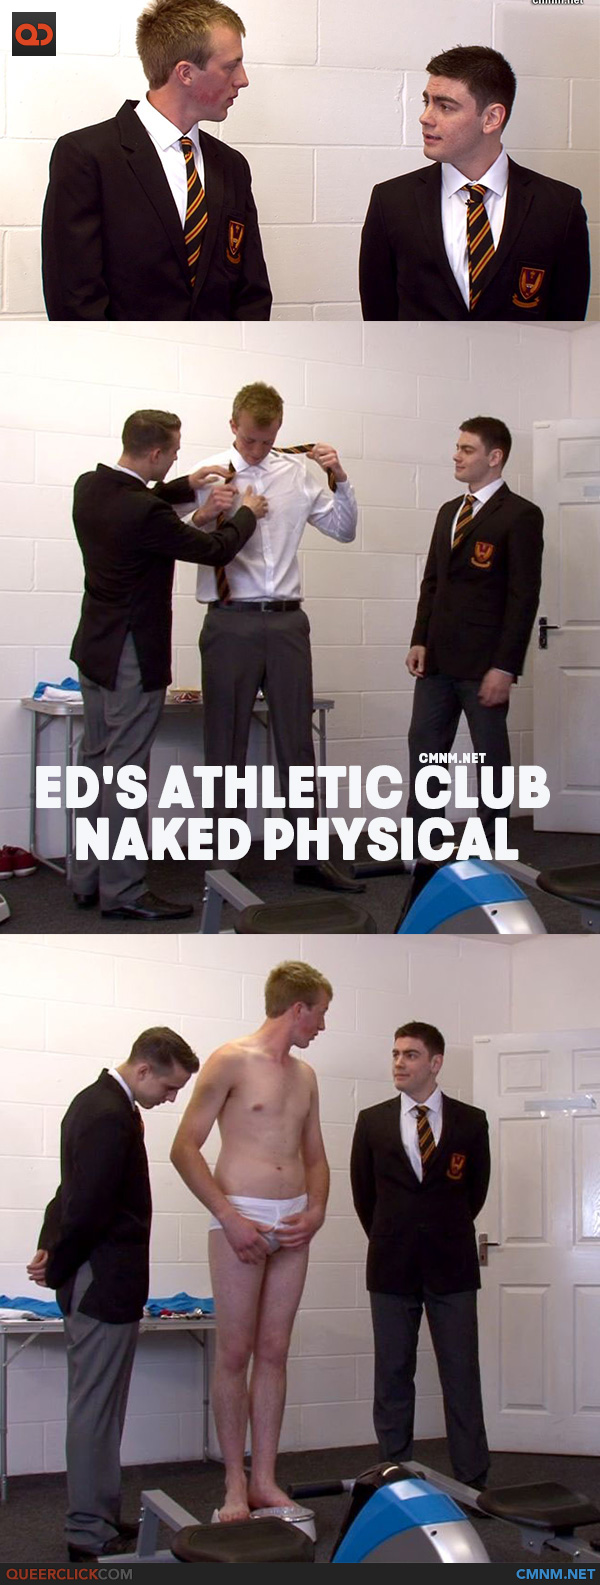 CMNM.net: Ed's Athletic Club Naked Physical